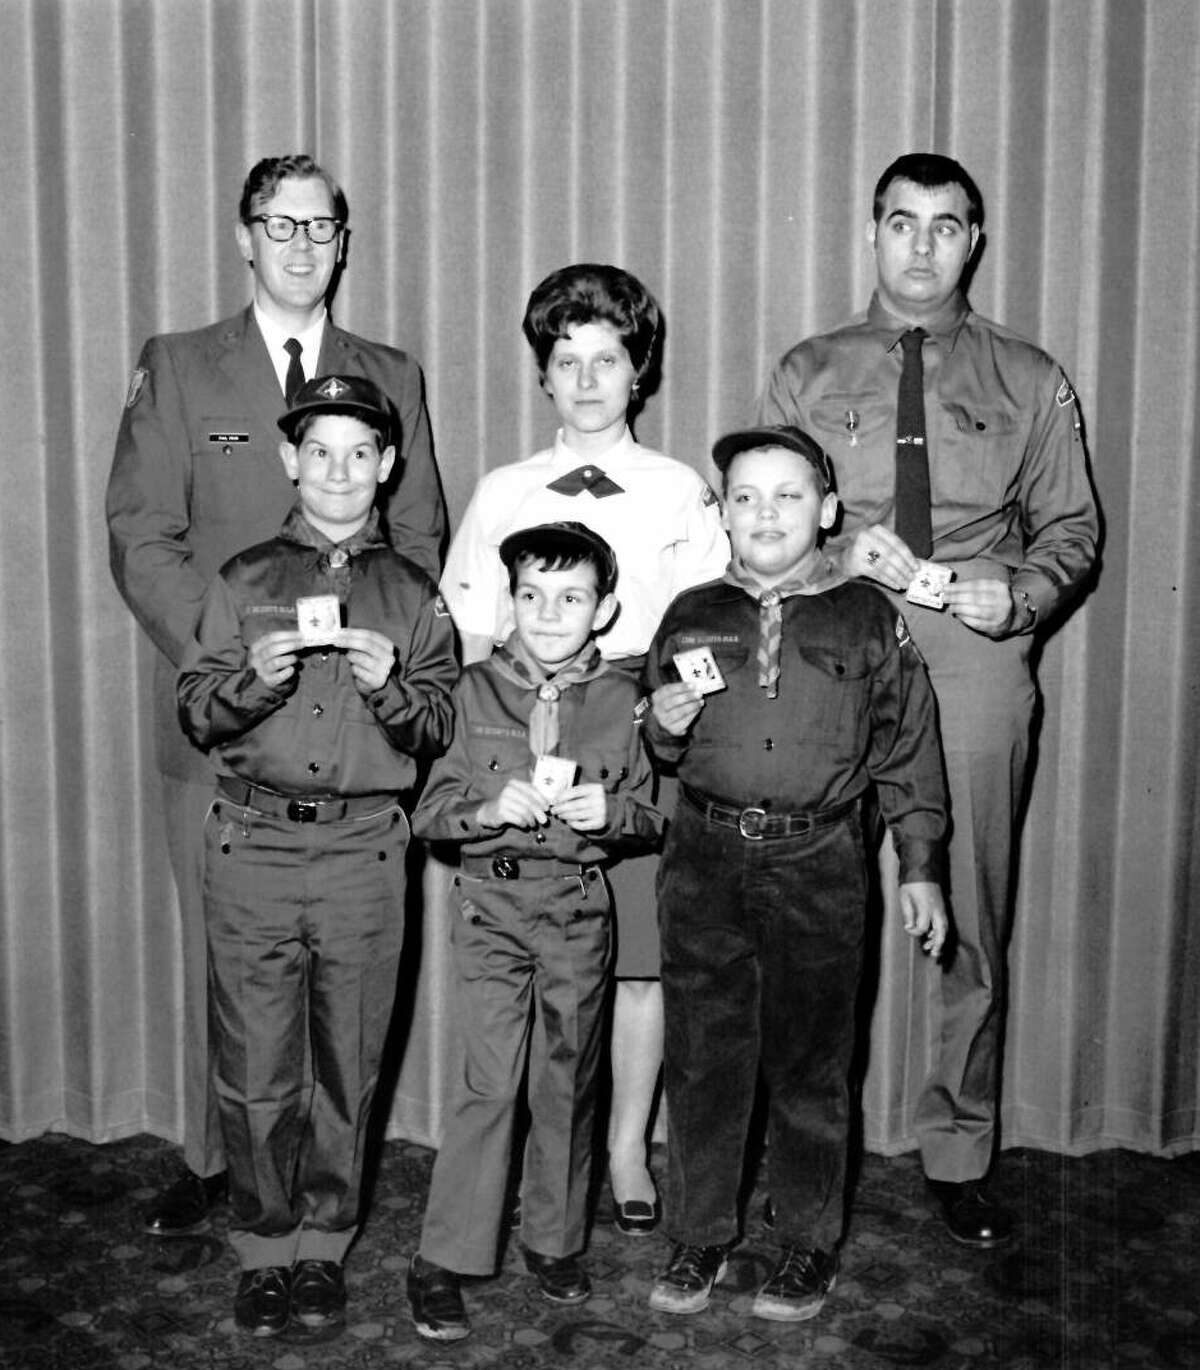 Scout Night at Civitan Club. Among Scouts honored are, from left, Cub Scouts Tony Naples, Jamie Pitts and Eddie Braley of Cub Pack 18. In back, from left, Paul Price, Chippewa District Scout executive in charge of program, Mrs. Patrick Naples, den mother, and Richard Stuff, assistant Scoutmaster. February 1969